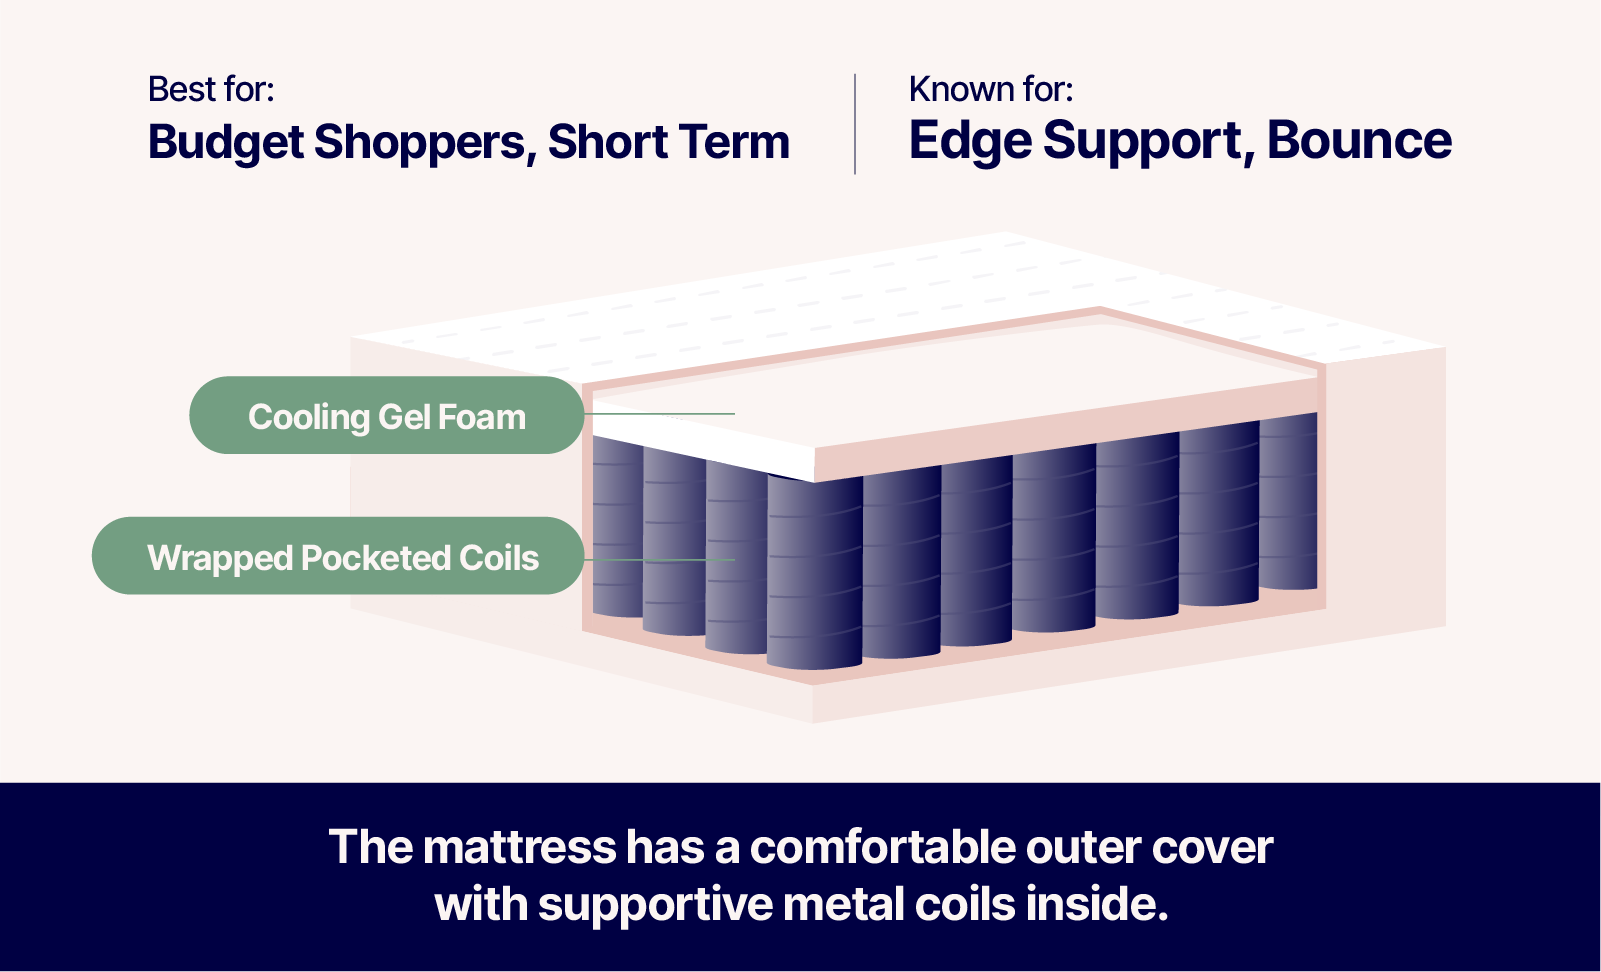 diagram of innerspring mattress showing cooling gel foam and wrapped pocket coil layers. Text says the mattress is best for budget shoppers and short-term sleeps, and the mattress is known for edge support and bounce. Description states that the mattress has a comfortable outer cover with supportive metal coils inside.